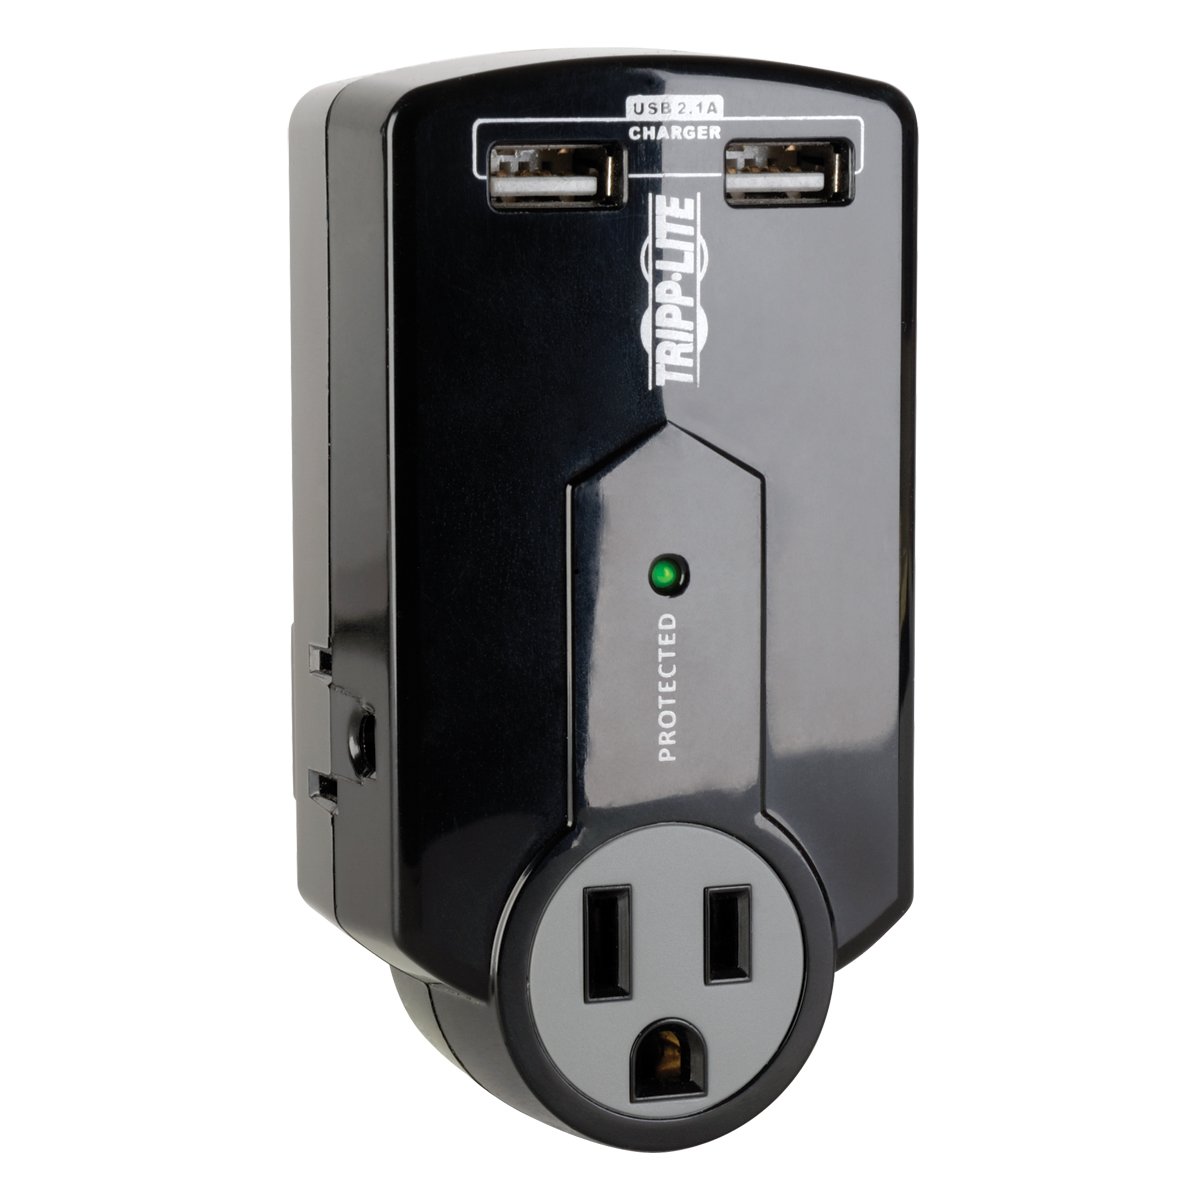 Protect It! 3-Outlet Surge Protector, Direct Plug-In, 540 Joules, 2.1A USB Charger - SK120USB 